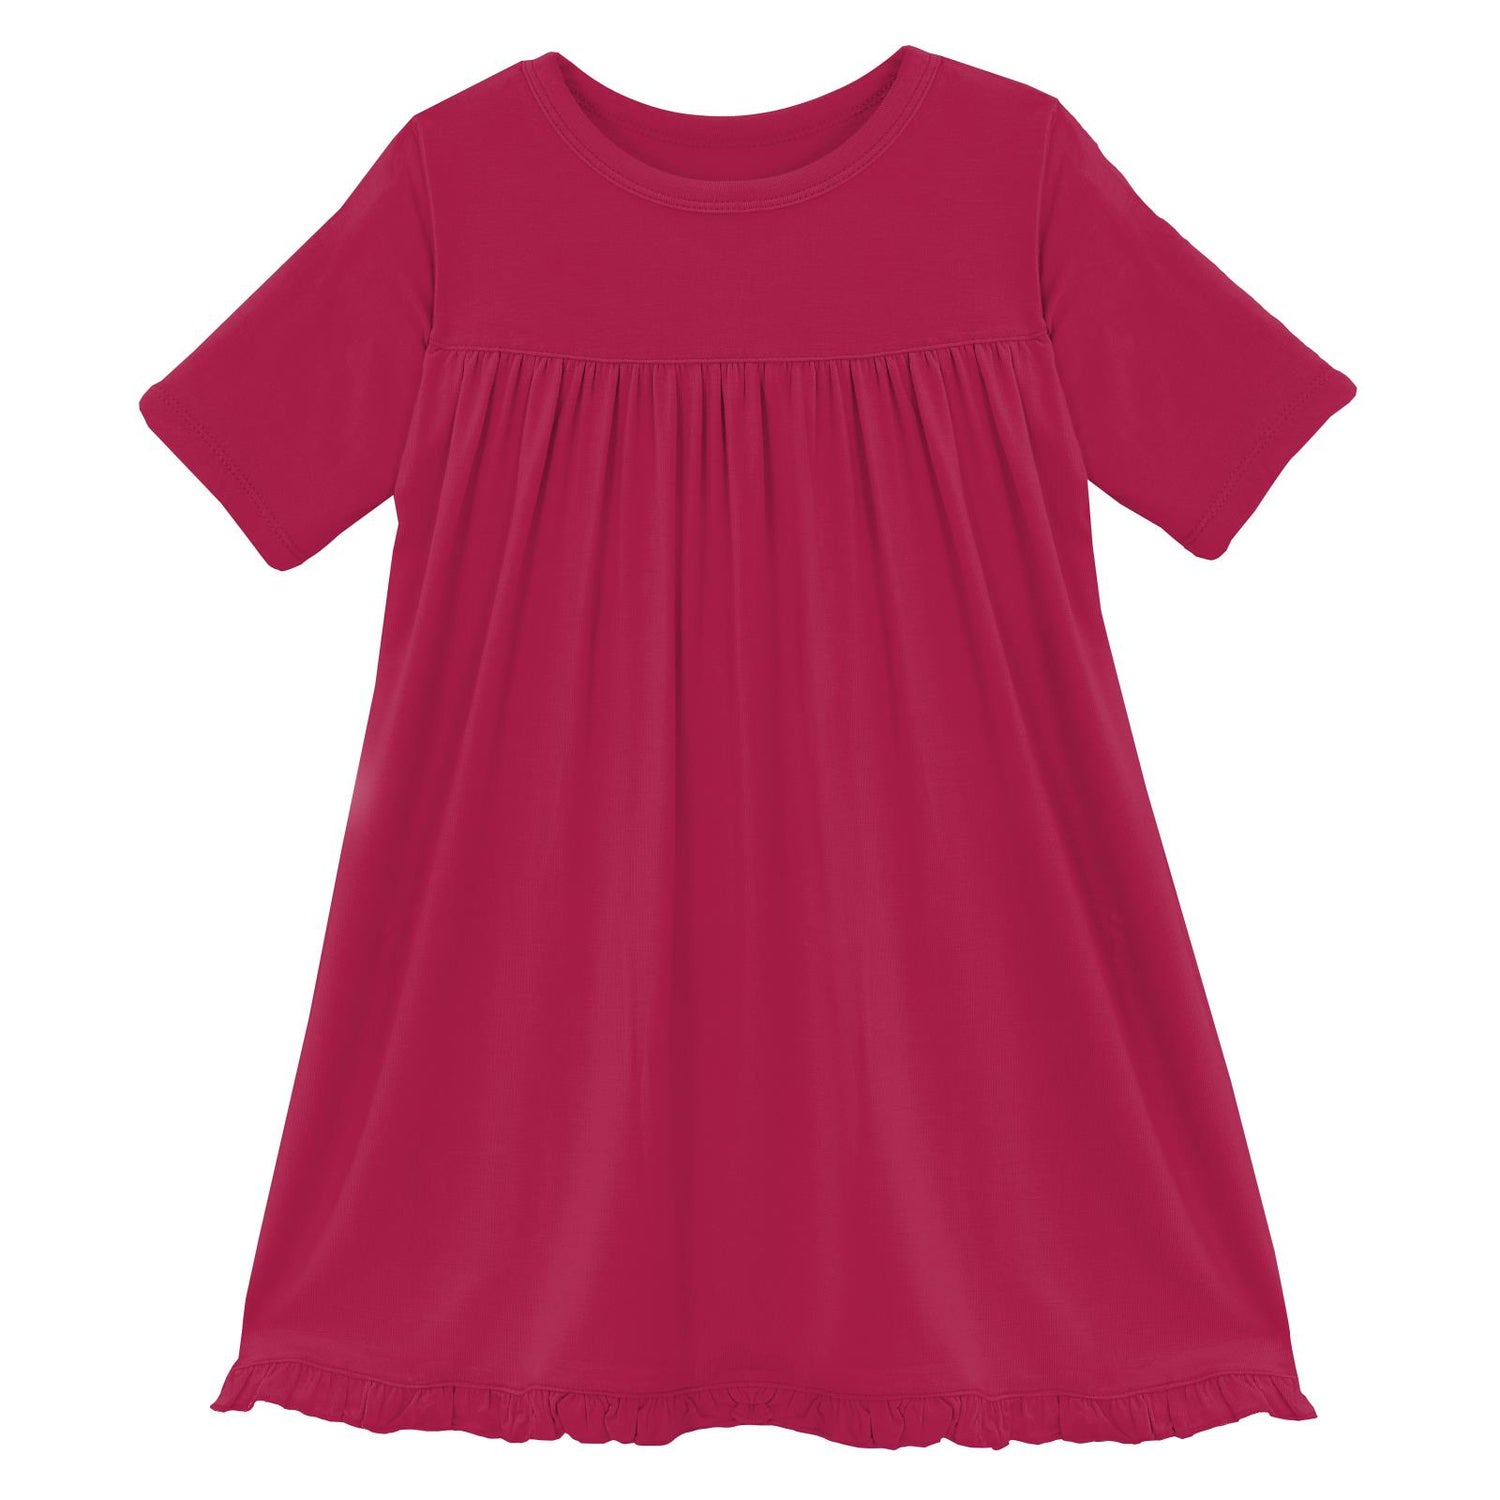 Classic Short Sleeve Swing Dress in Rhododendron